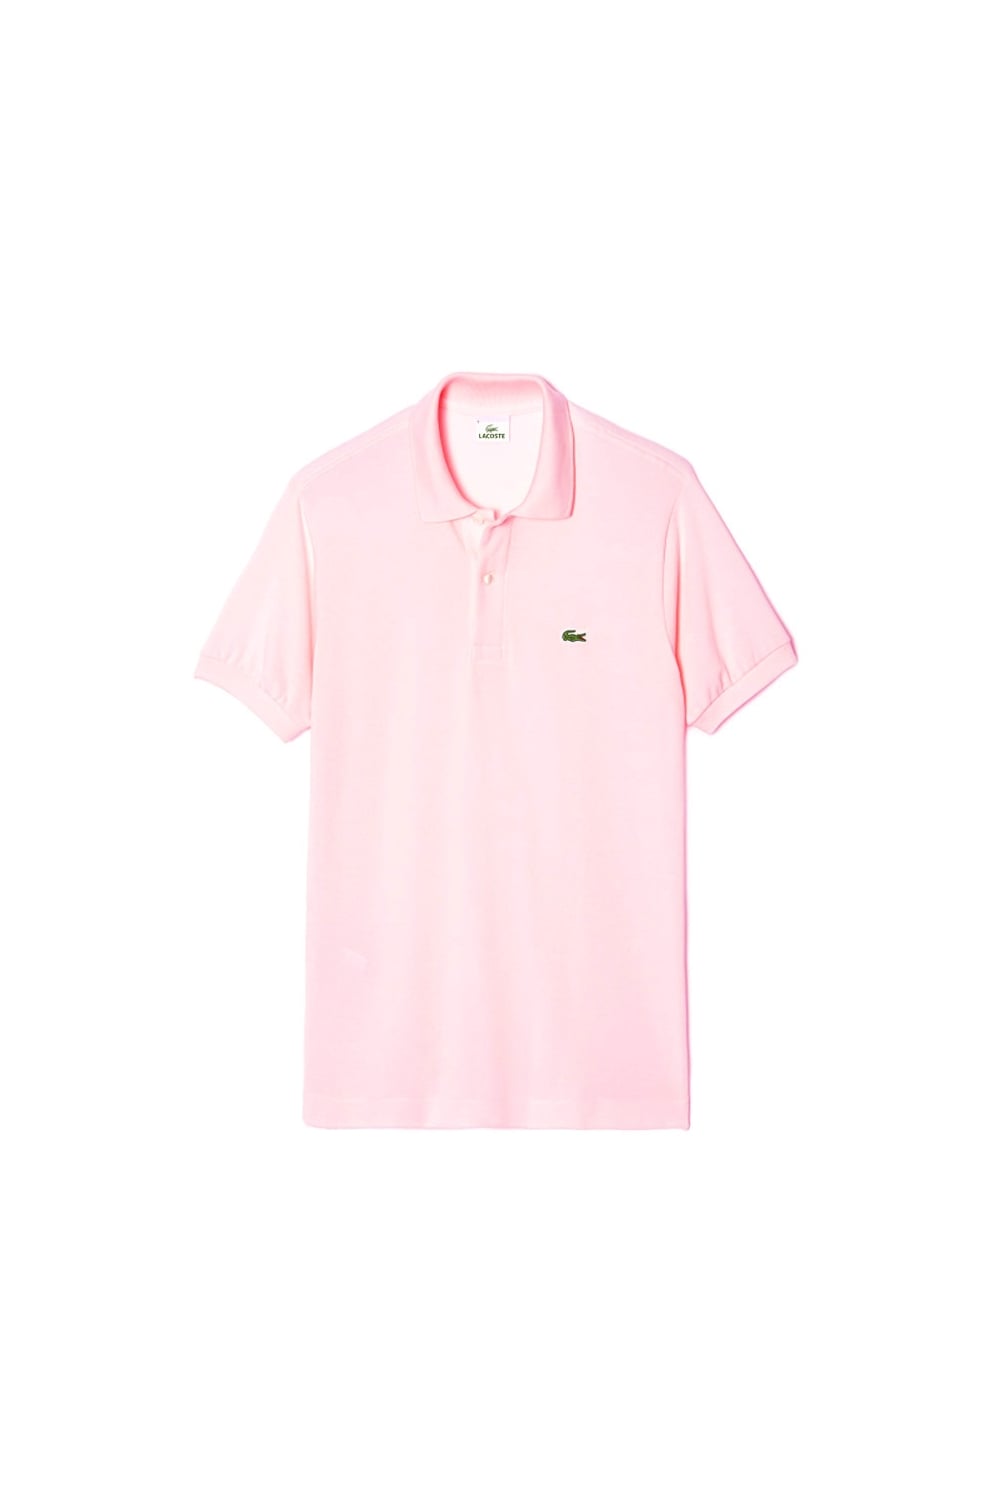 Pink Polo Logo - Lacoste Logo Pique Regular Fit Polo Shirt Pale Pink - Clothing from ...